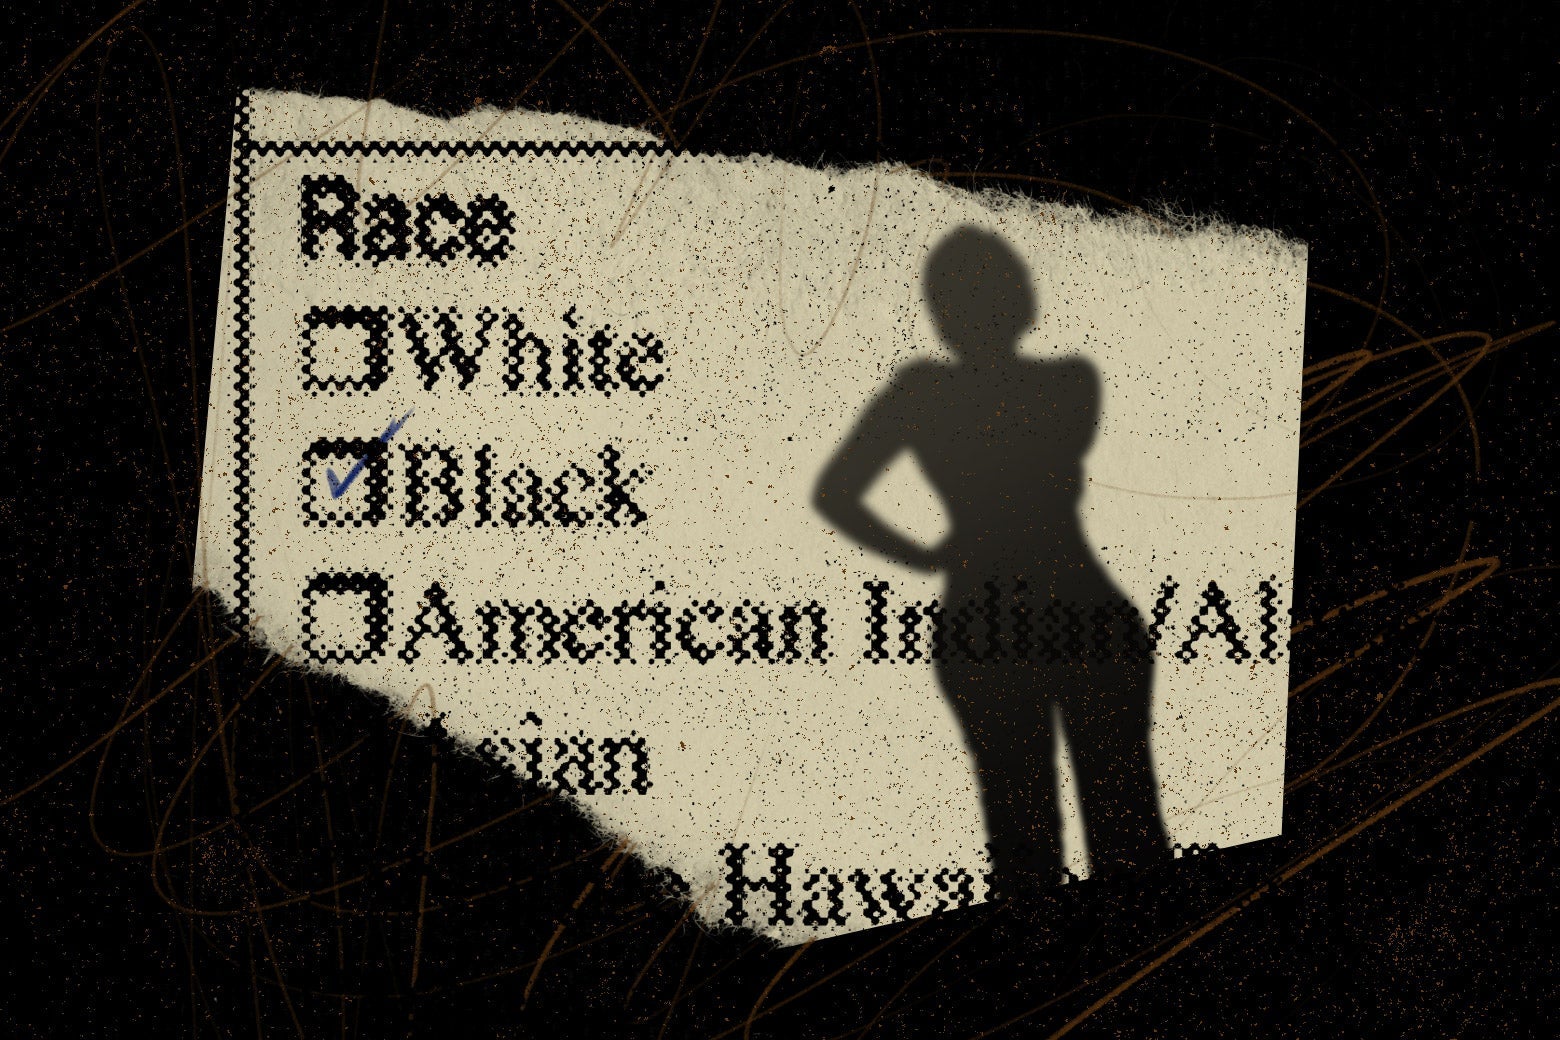 A silhouette of a woman on top of a form asking for the respondent's race.